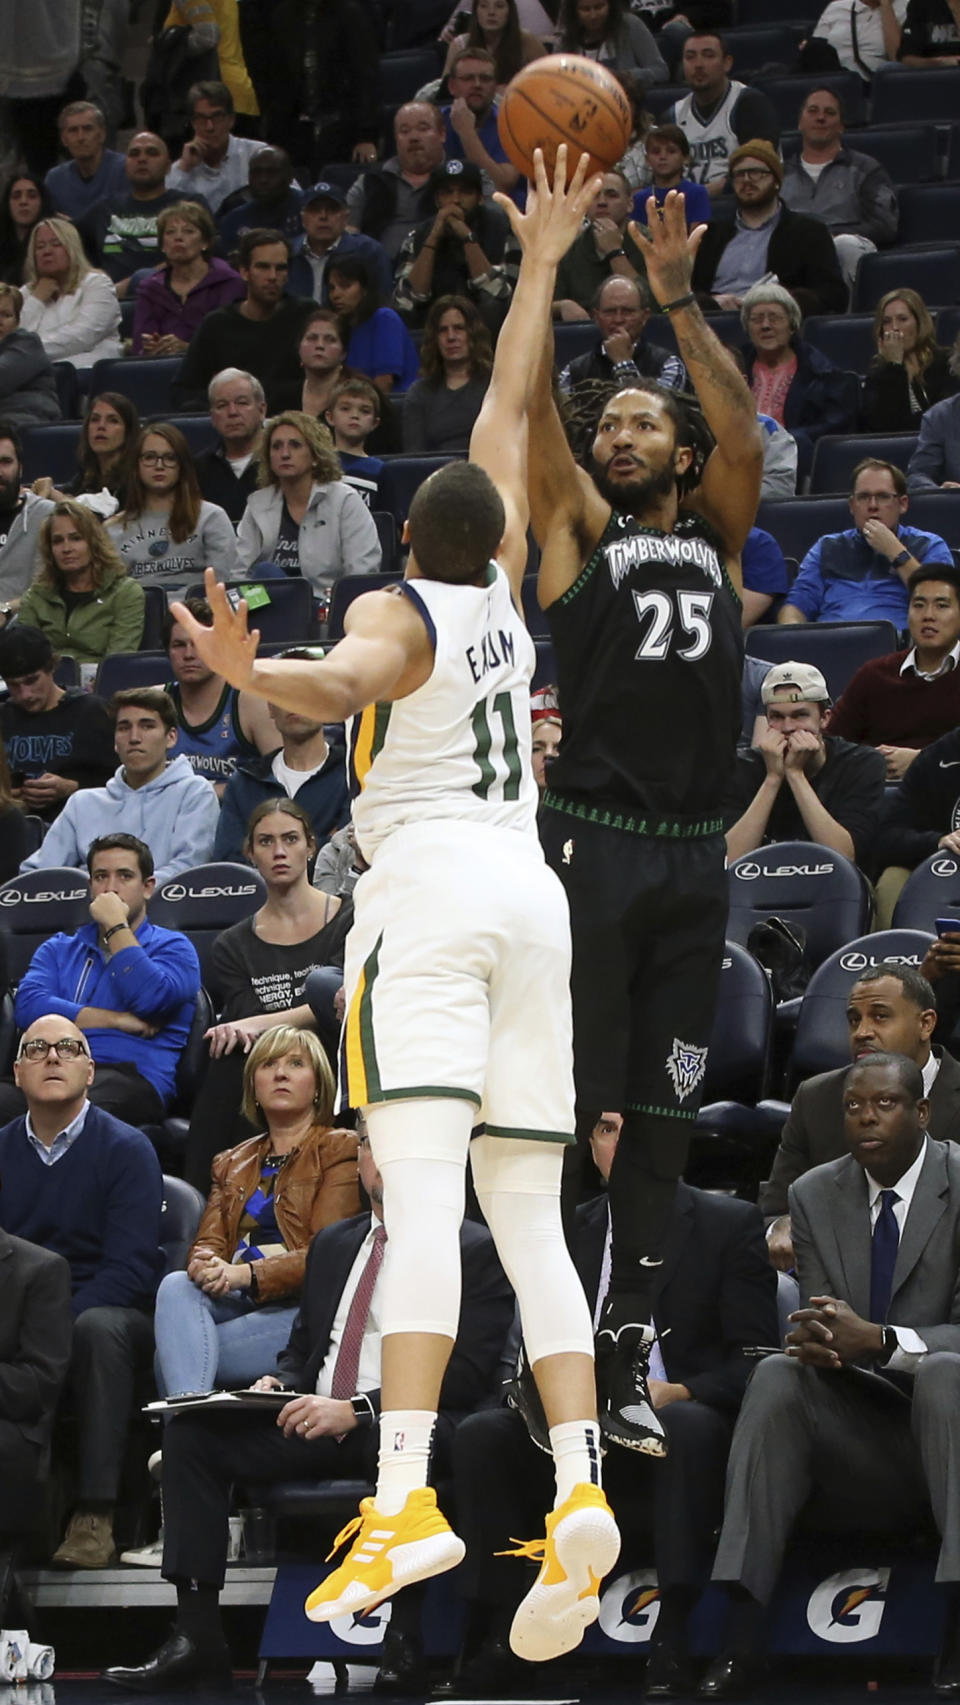 Minnesota Timberwolves' Derrick Rose shoots over Utah Jazz's Dante Exum during the second half of an NBA basketball game Wednesday, Oct. 31, 2018, in Minneapolis. The Timberwolves won 128-125. Rose scored 50 points, a career high. (AP Photo/Jim Mone)